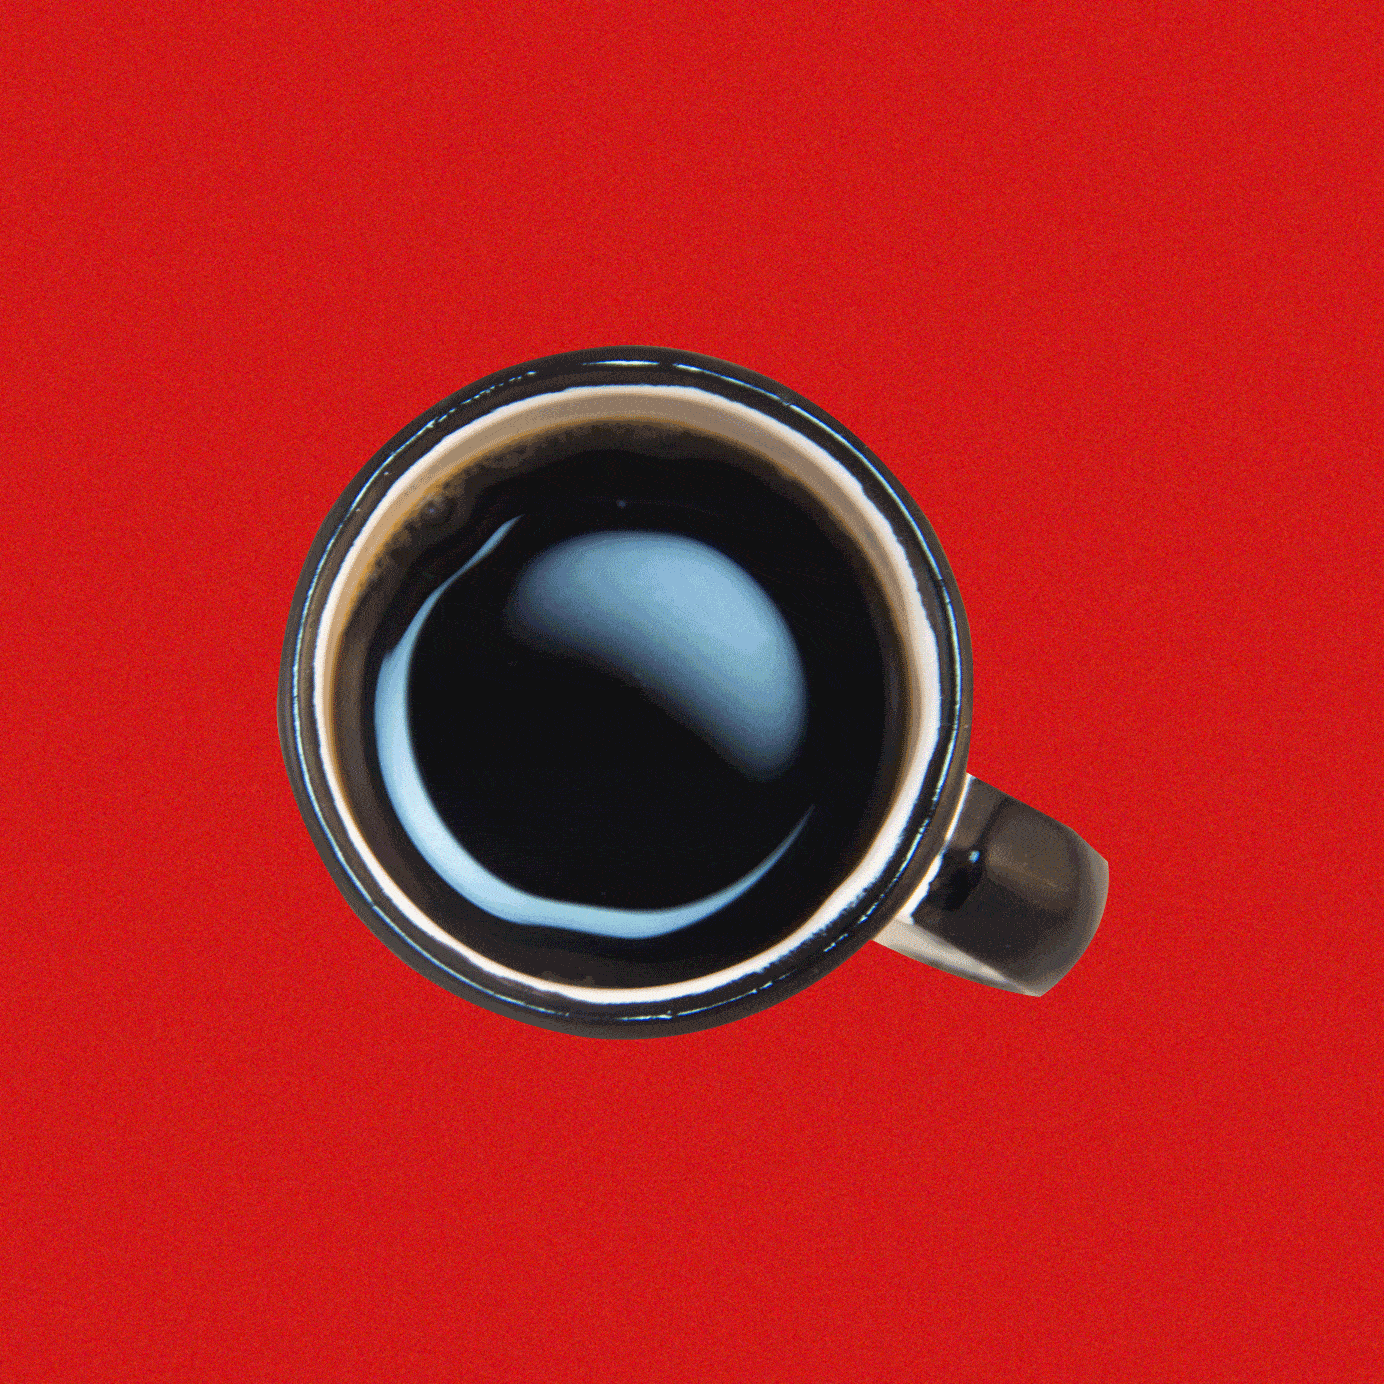 The Minimalist’s Guide to a Perfect Cup of Coffee